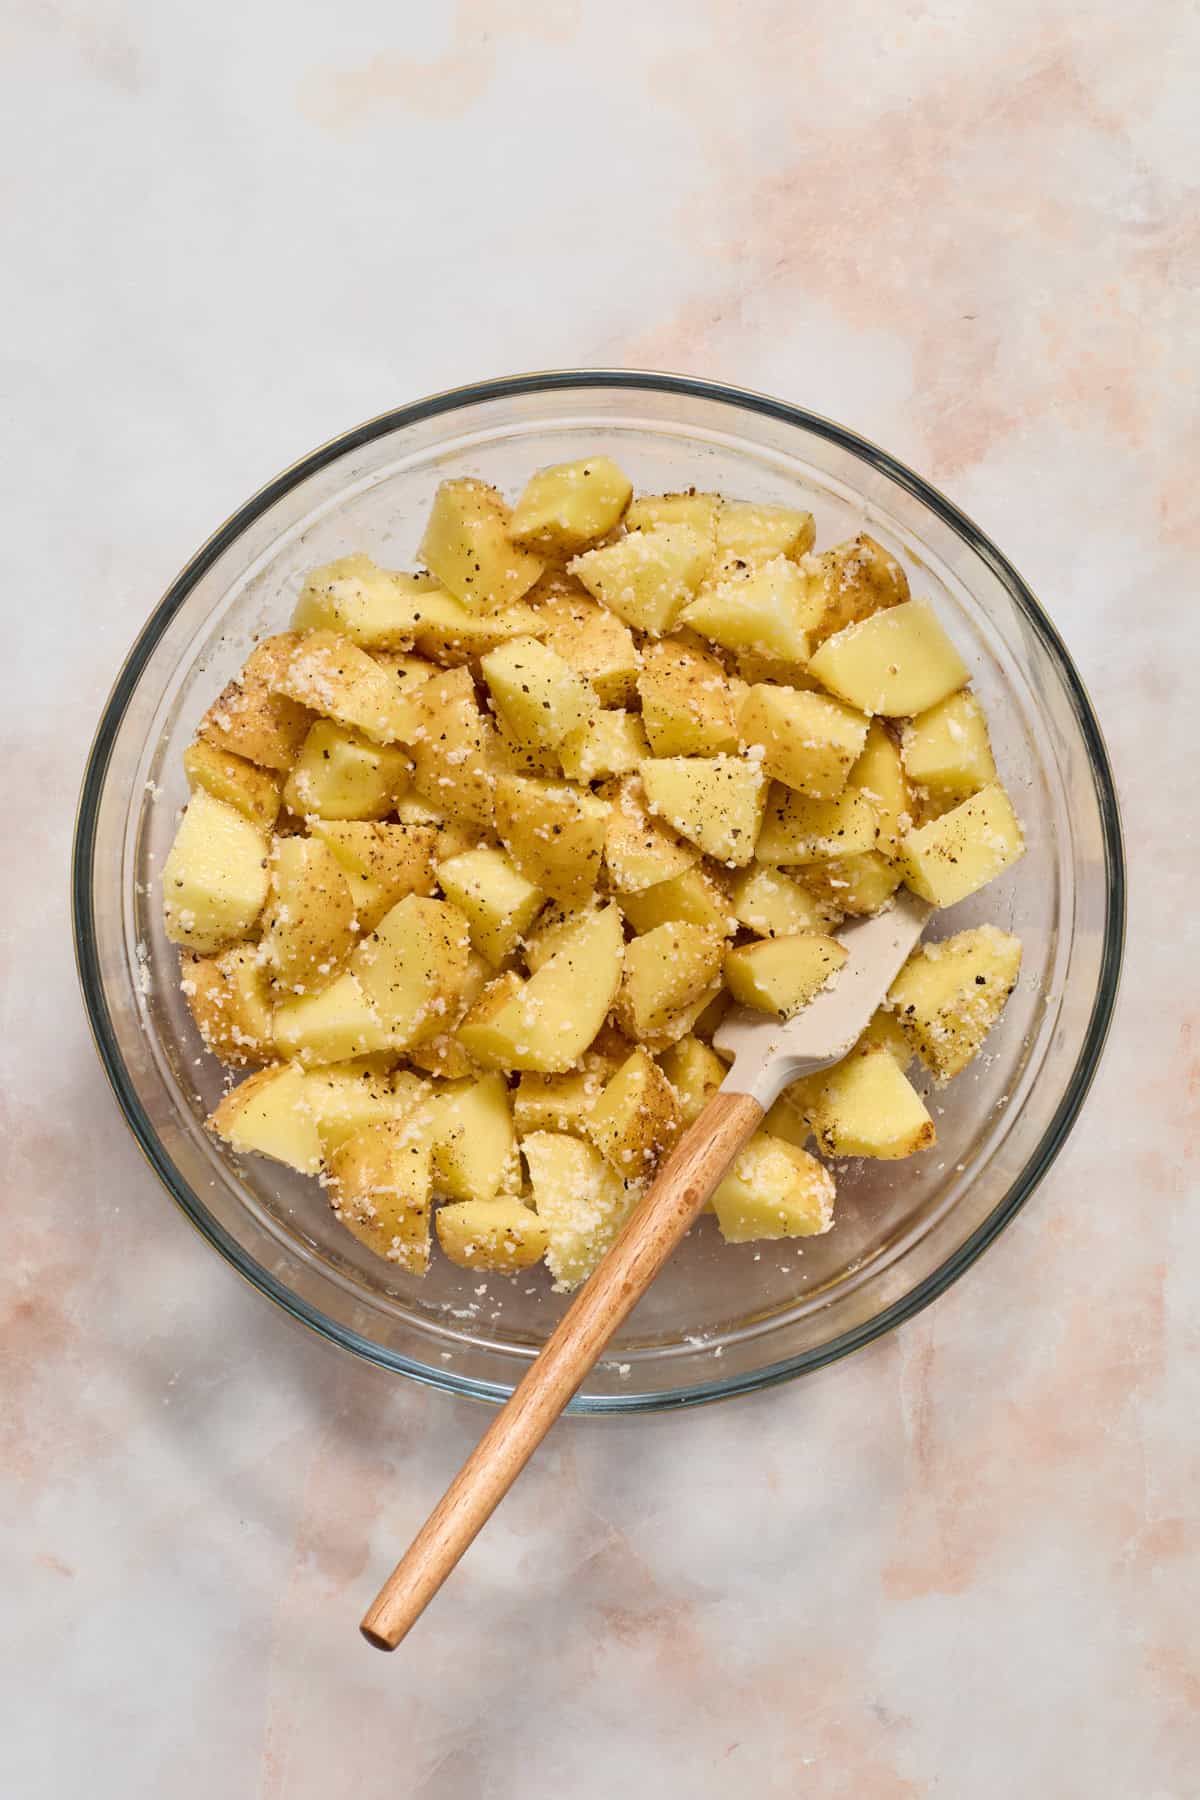 Potatoes cut into bite sized pieces and tossed with parmesan and seasoning in glass bowl with spatula.